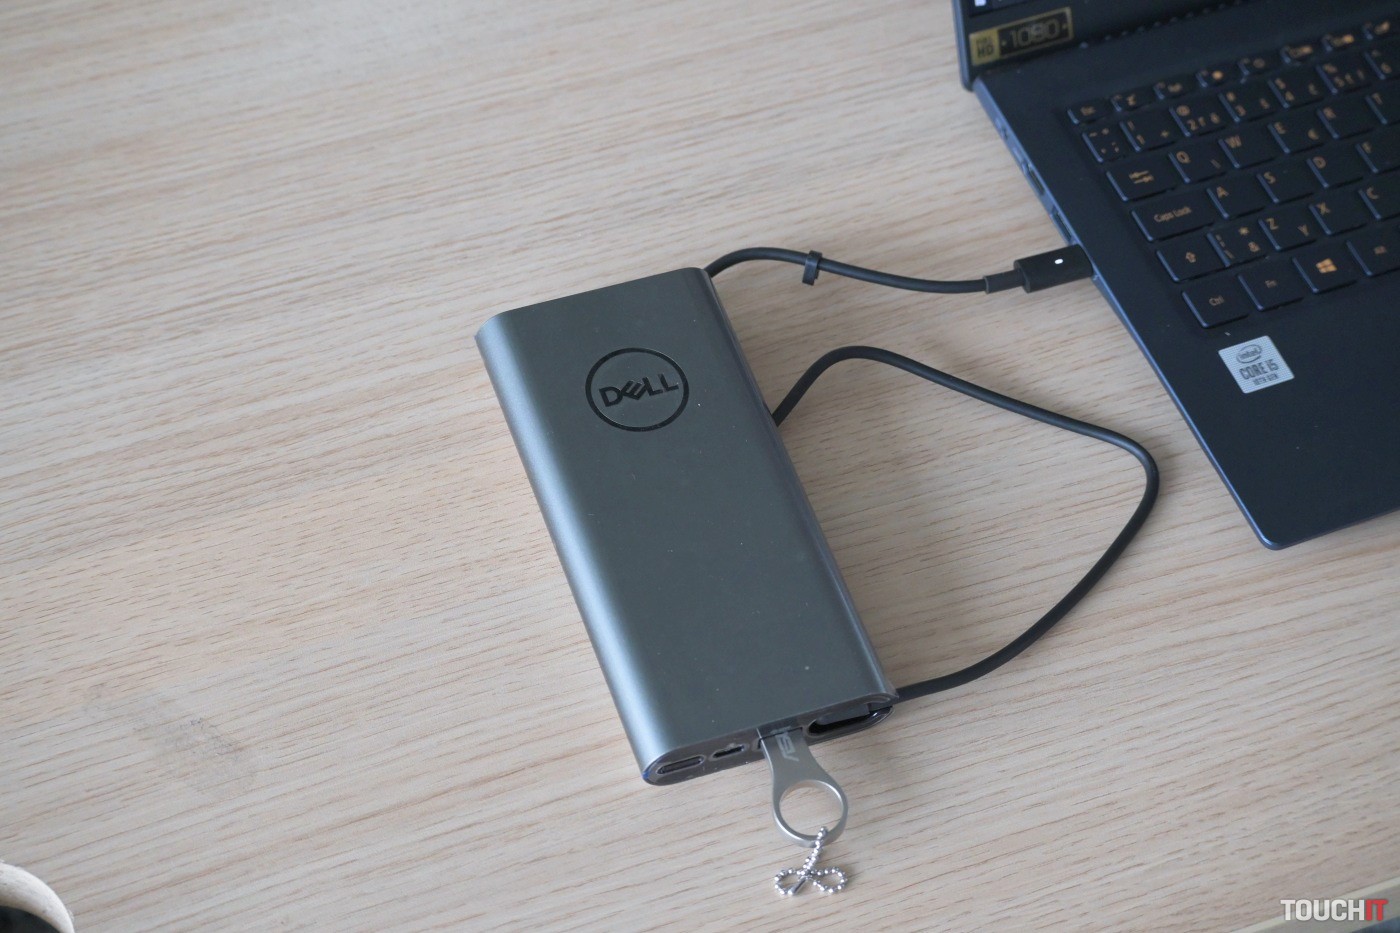 Dell Notebook Power Bank Plus PW7018LC